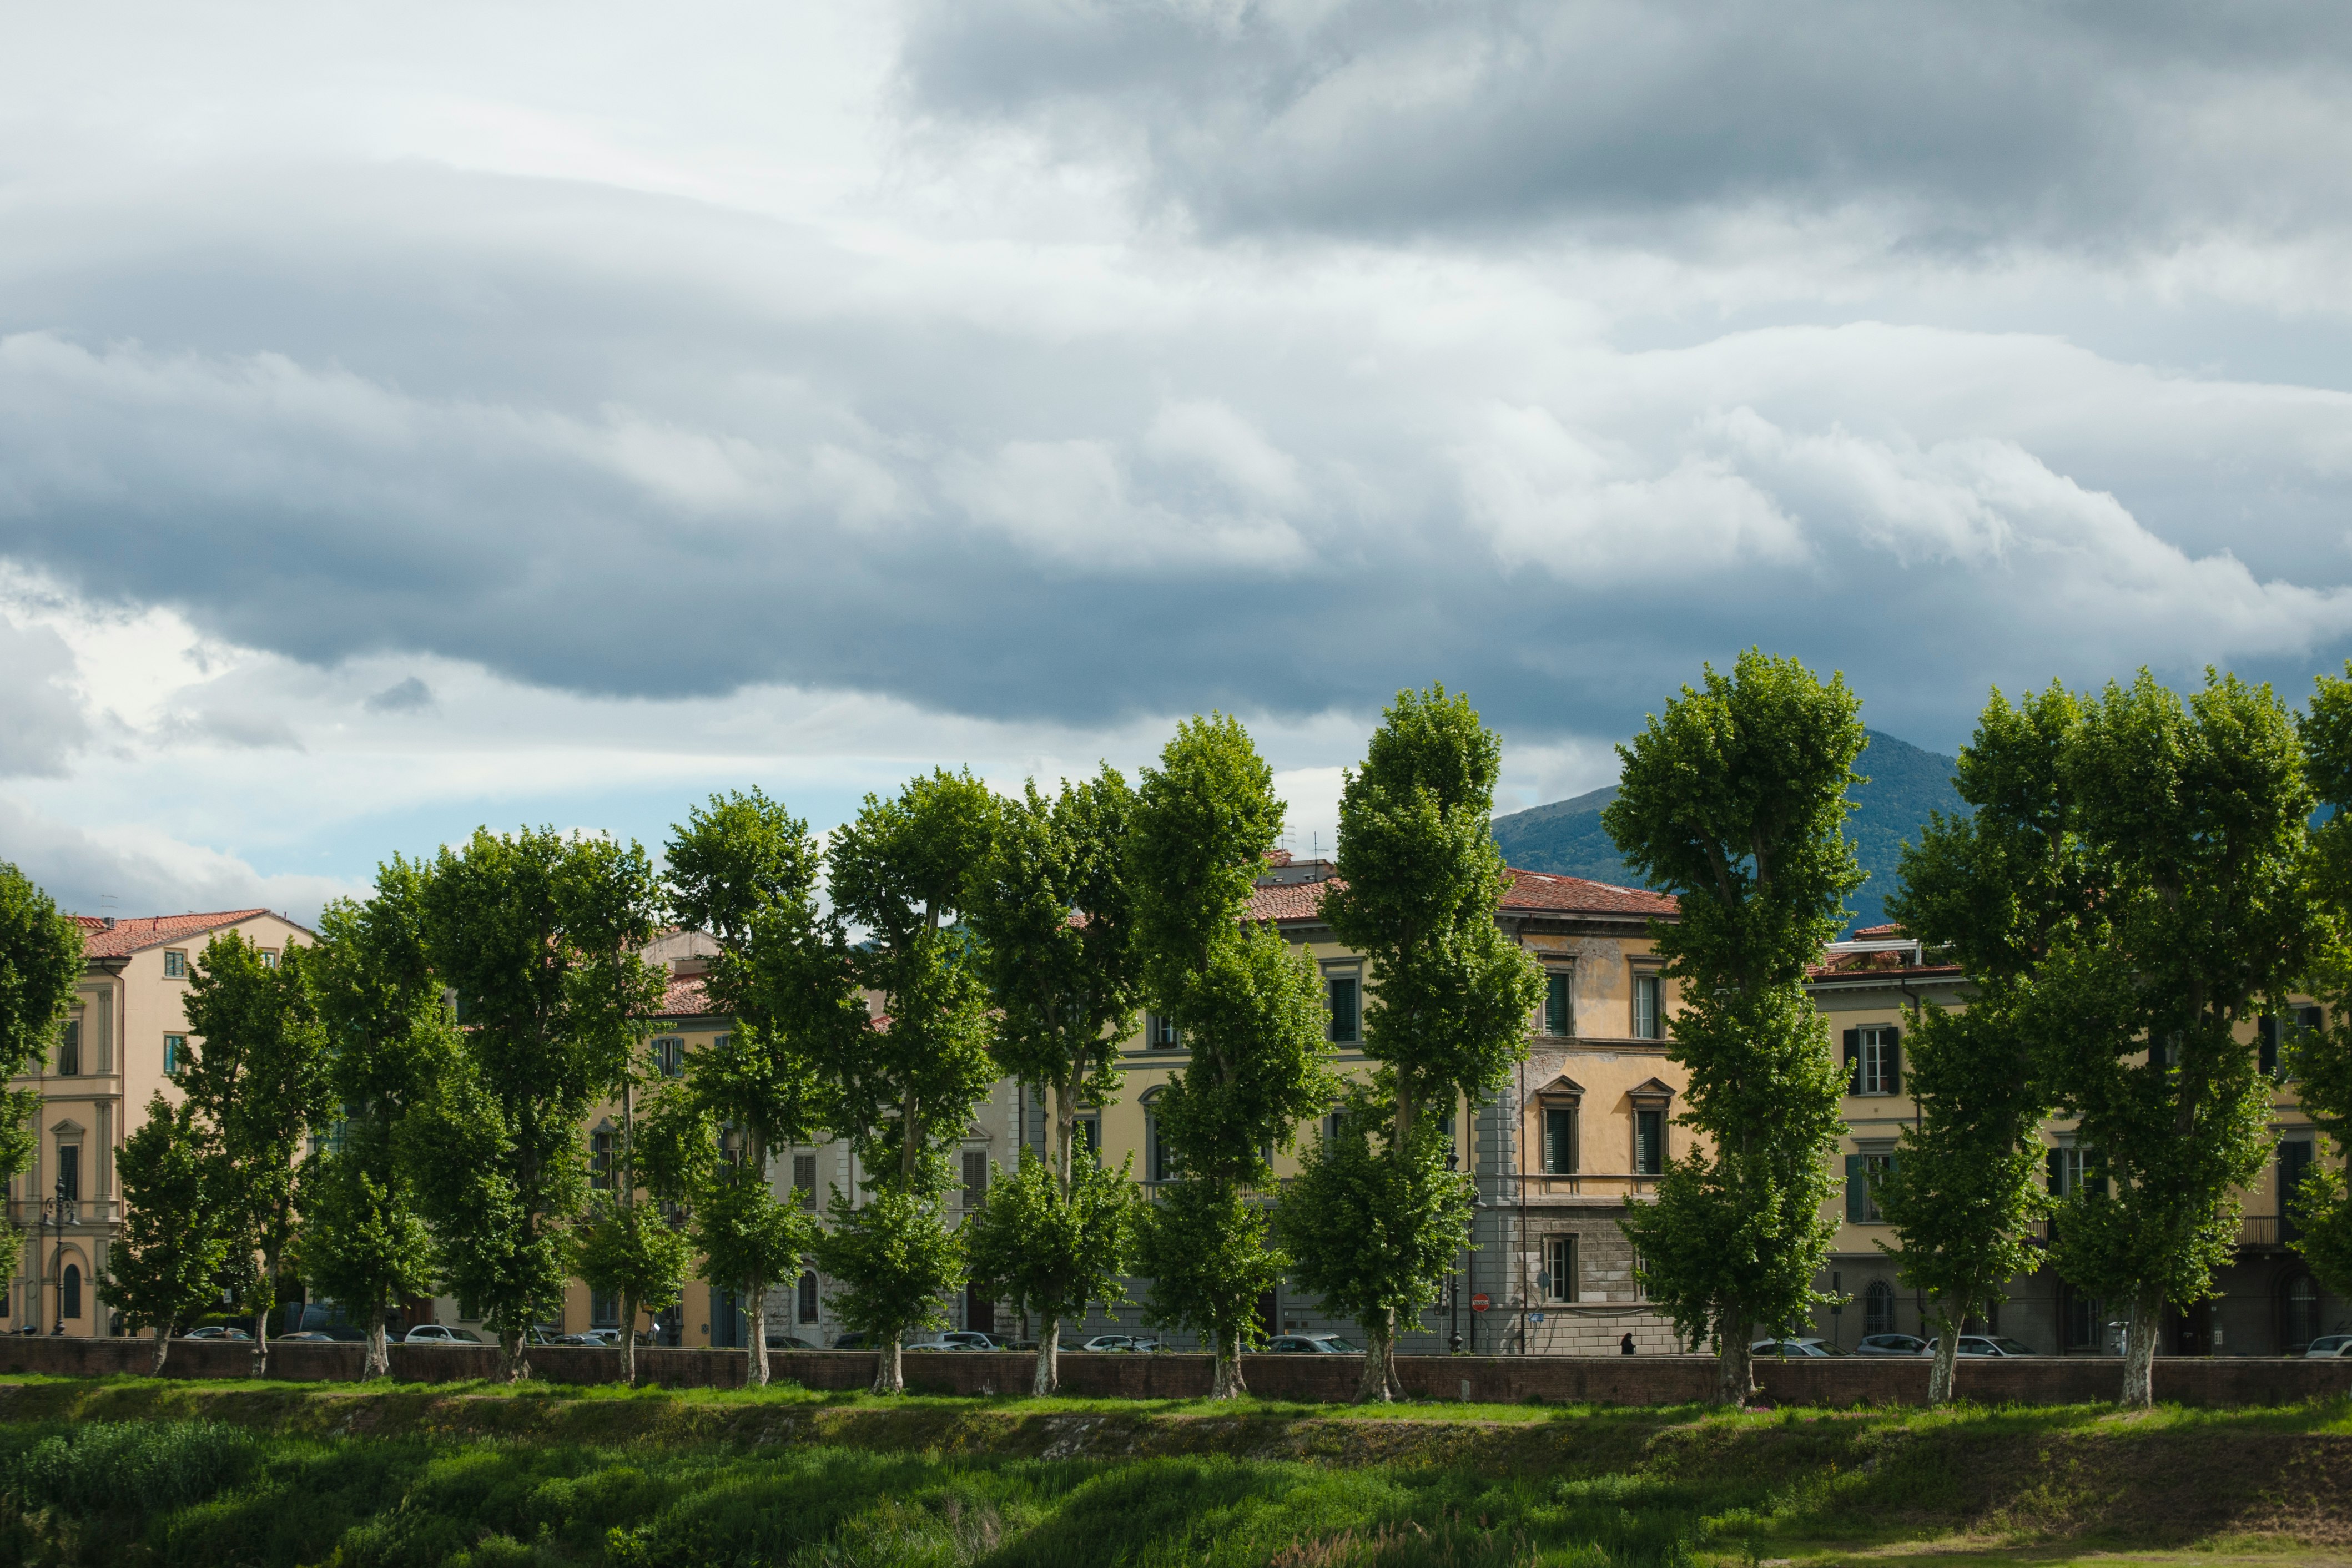 buildings surrounded with trees under cloudy sky